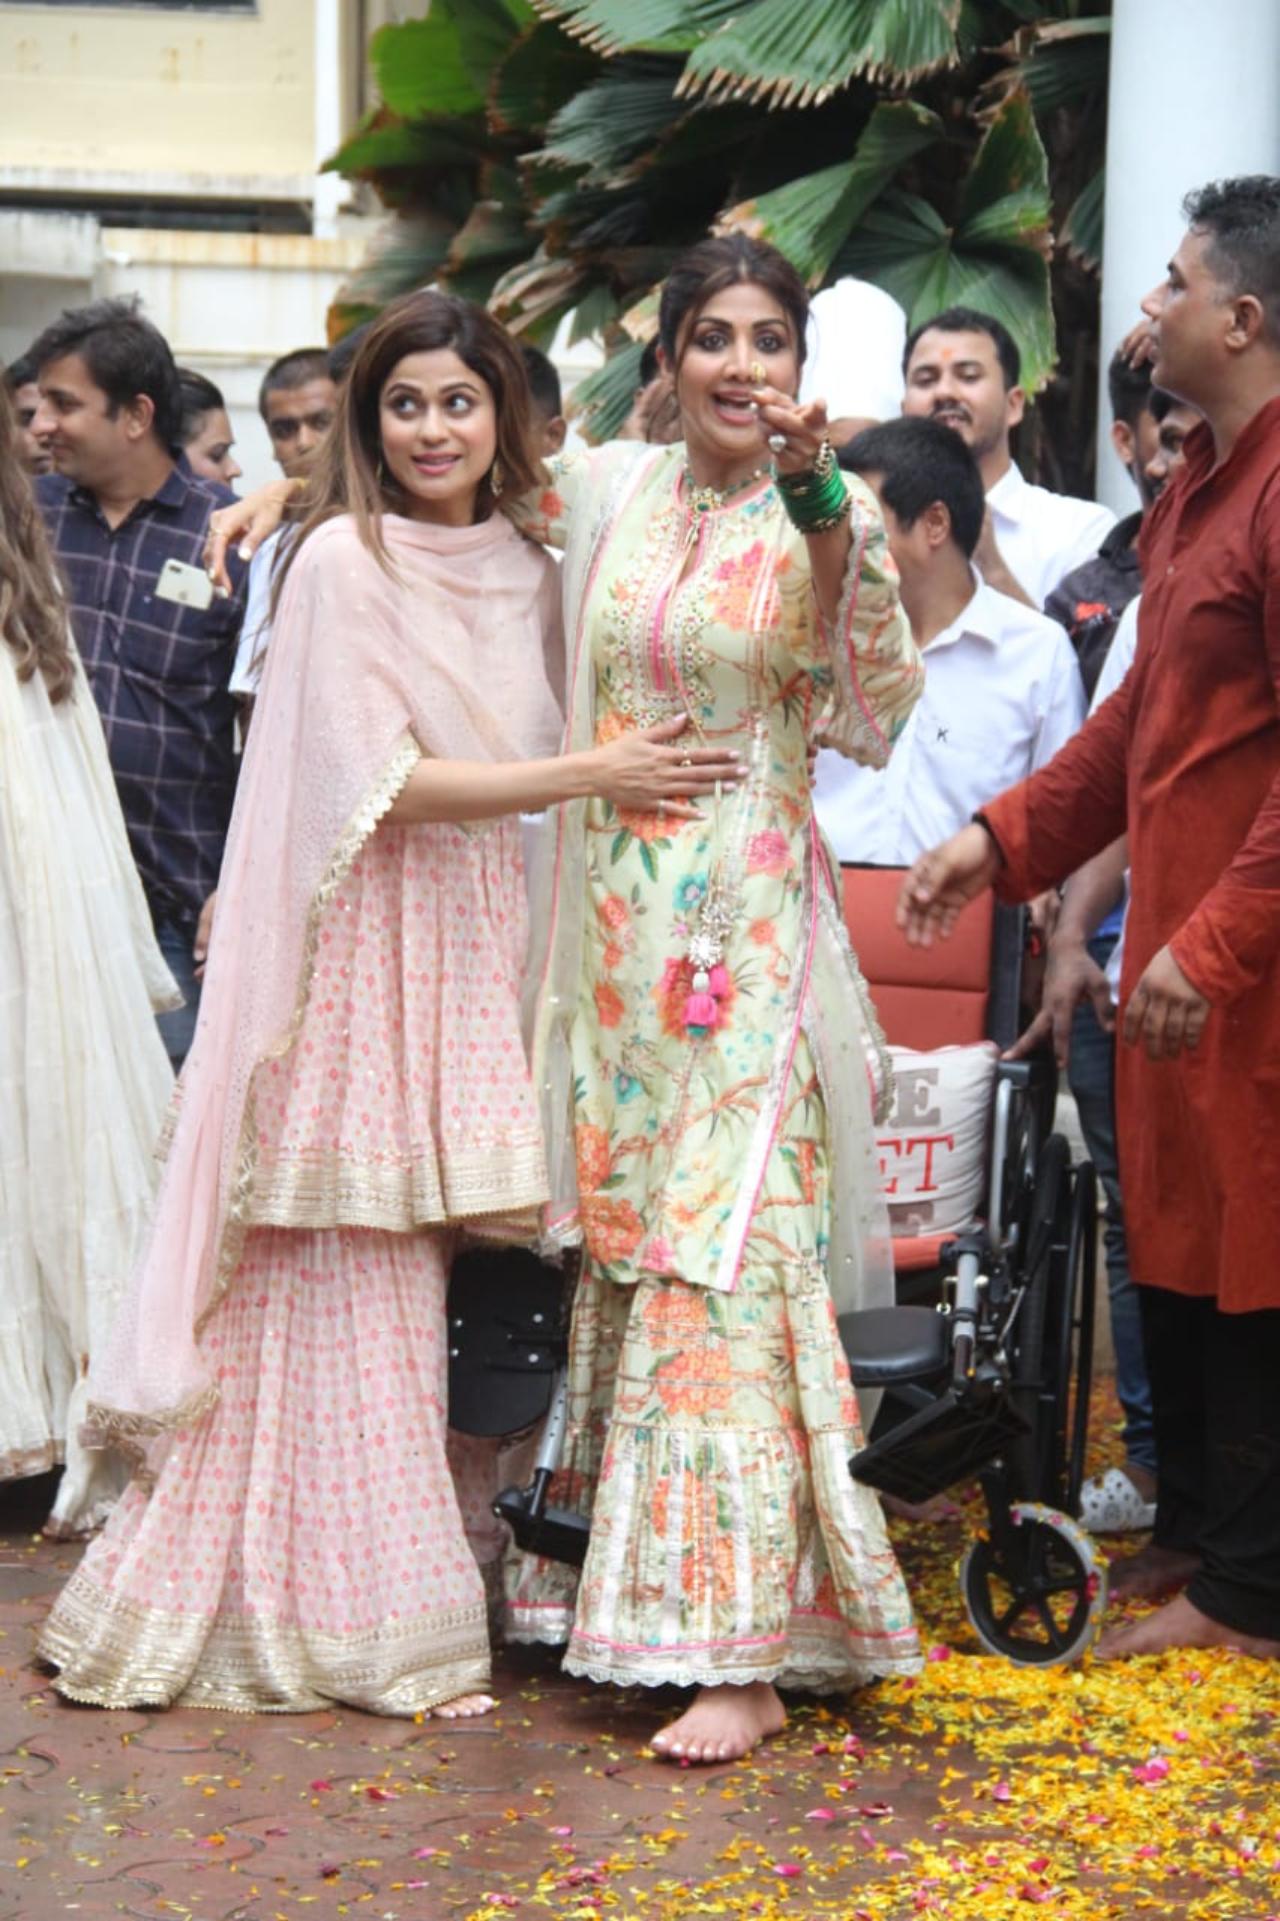 Shilpa Shetty and her sister Shamita Shetty danced their heart out as they took part in the visarjan procession outside their house